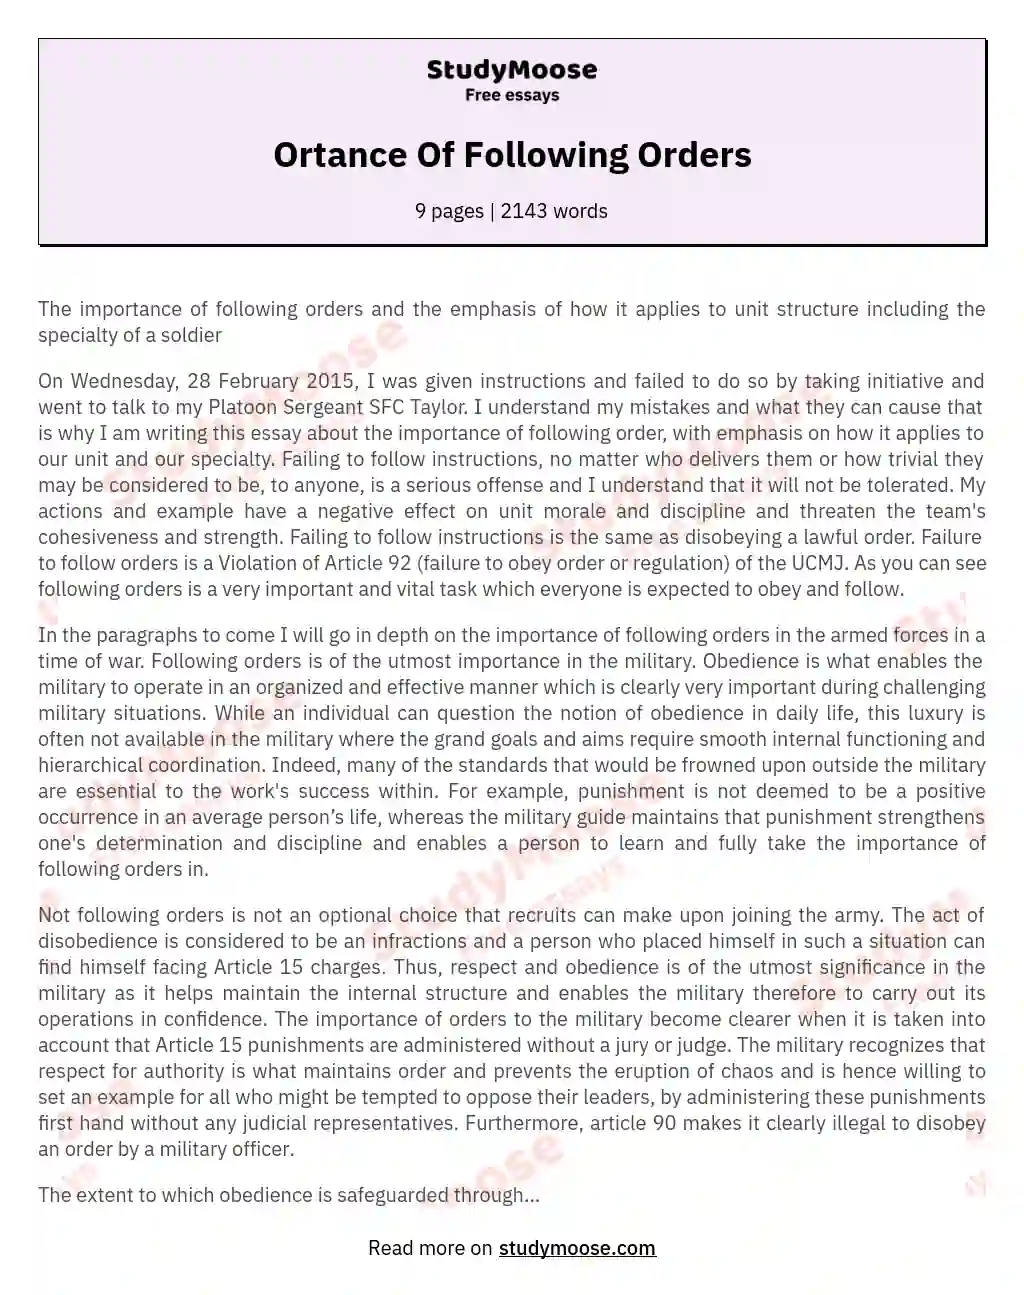 Ortance Of Following Orders essay